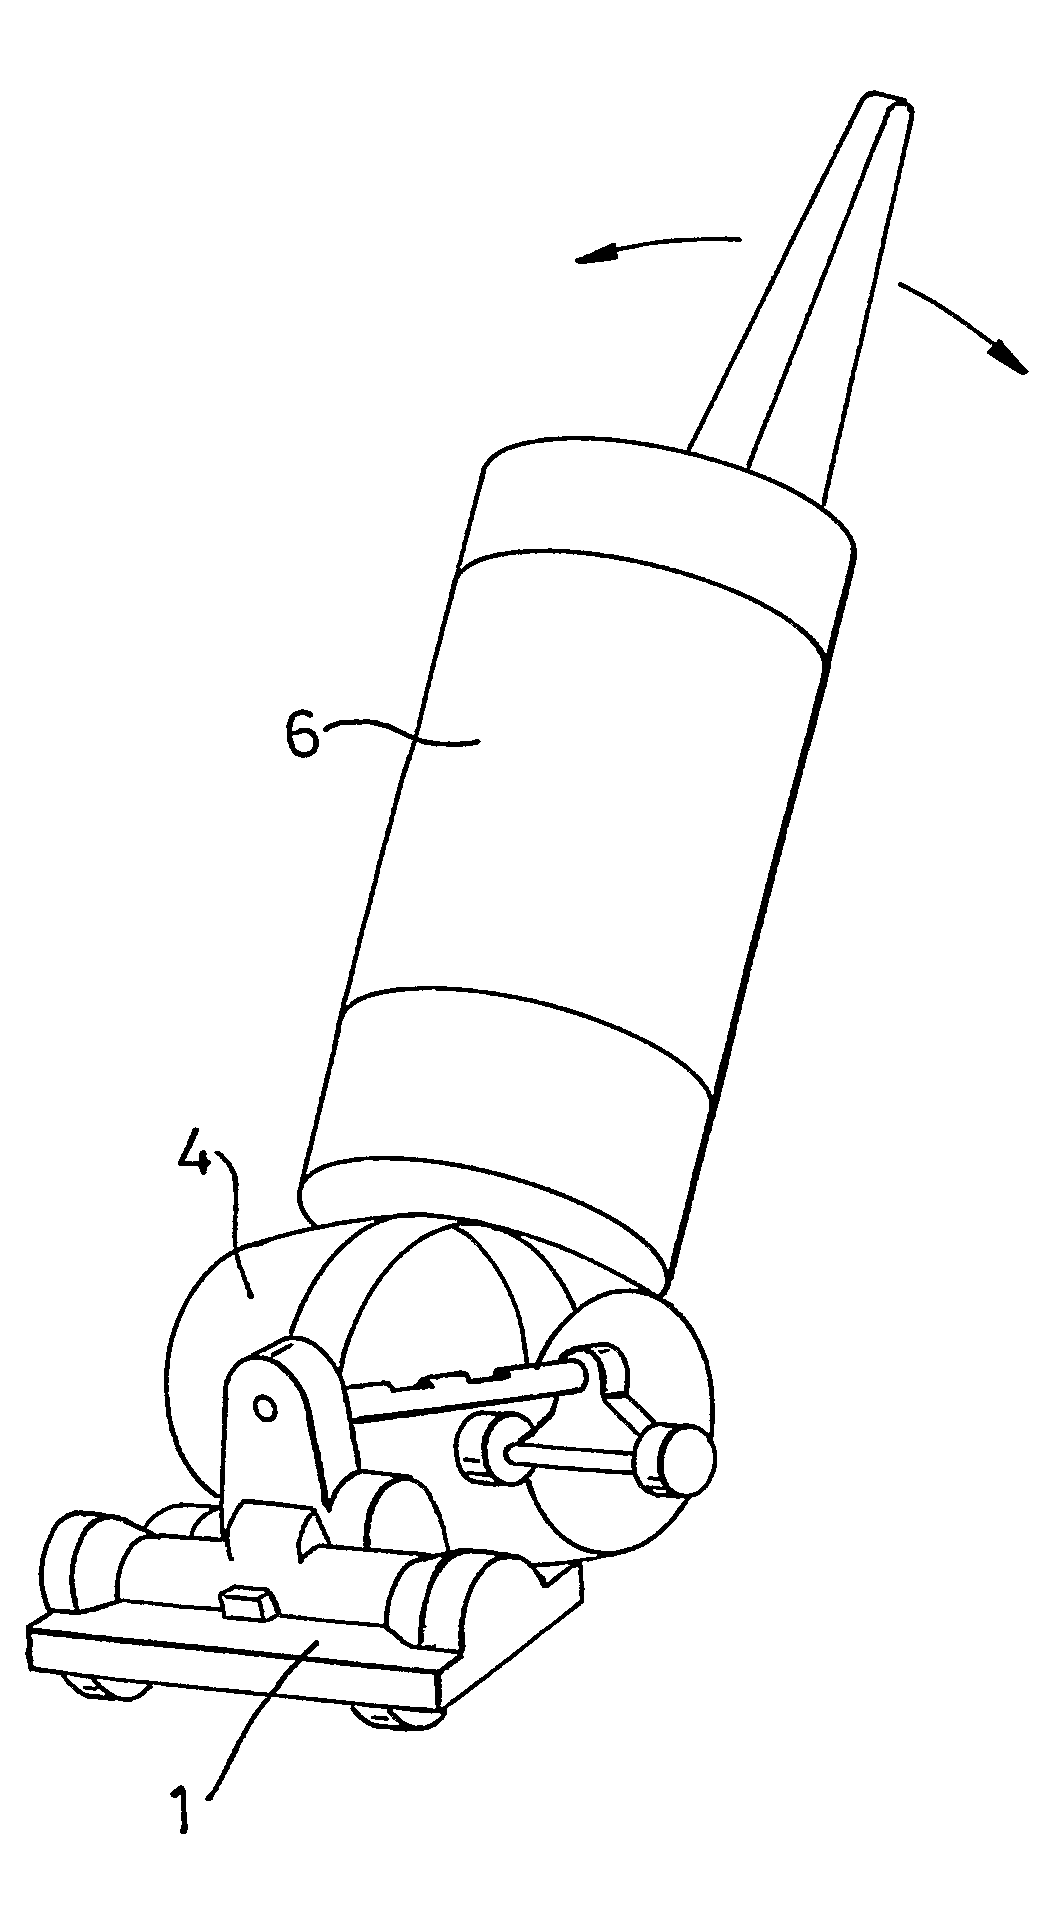 Vacuum Cleaner with Suction Head with Locking Means of Pivotal Movement About Axis of Rotation